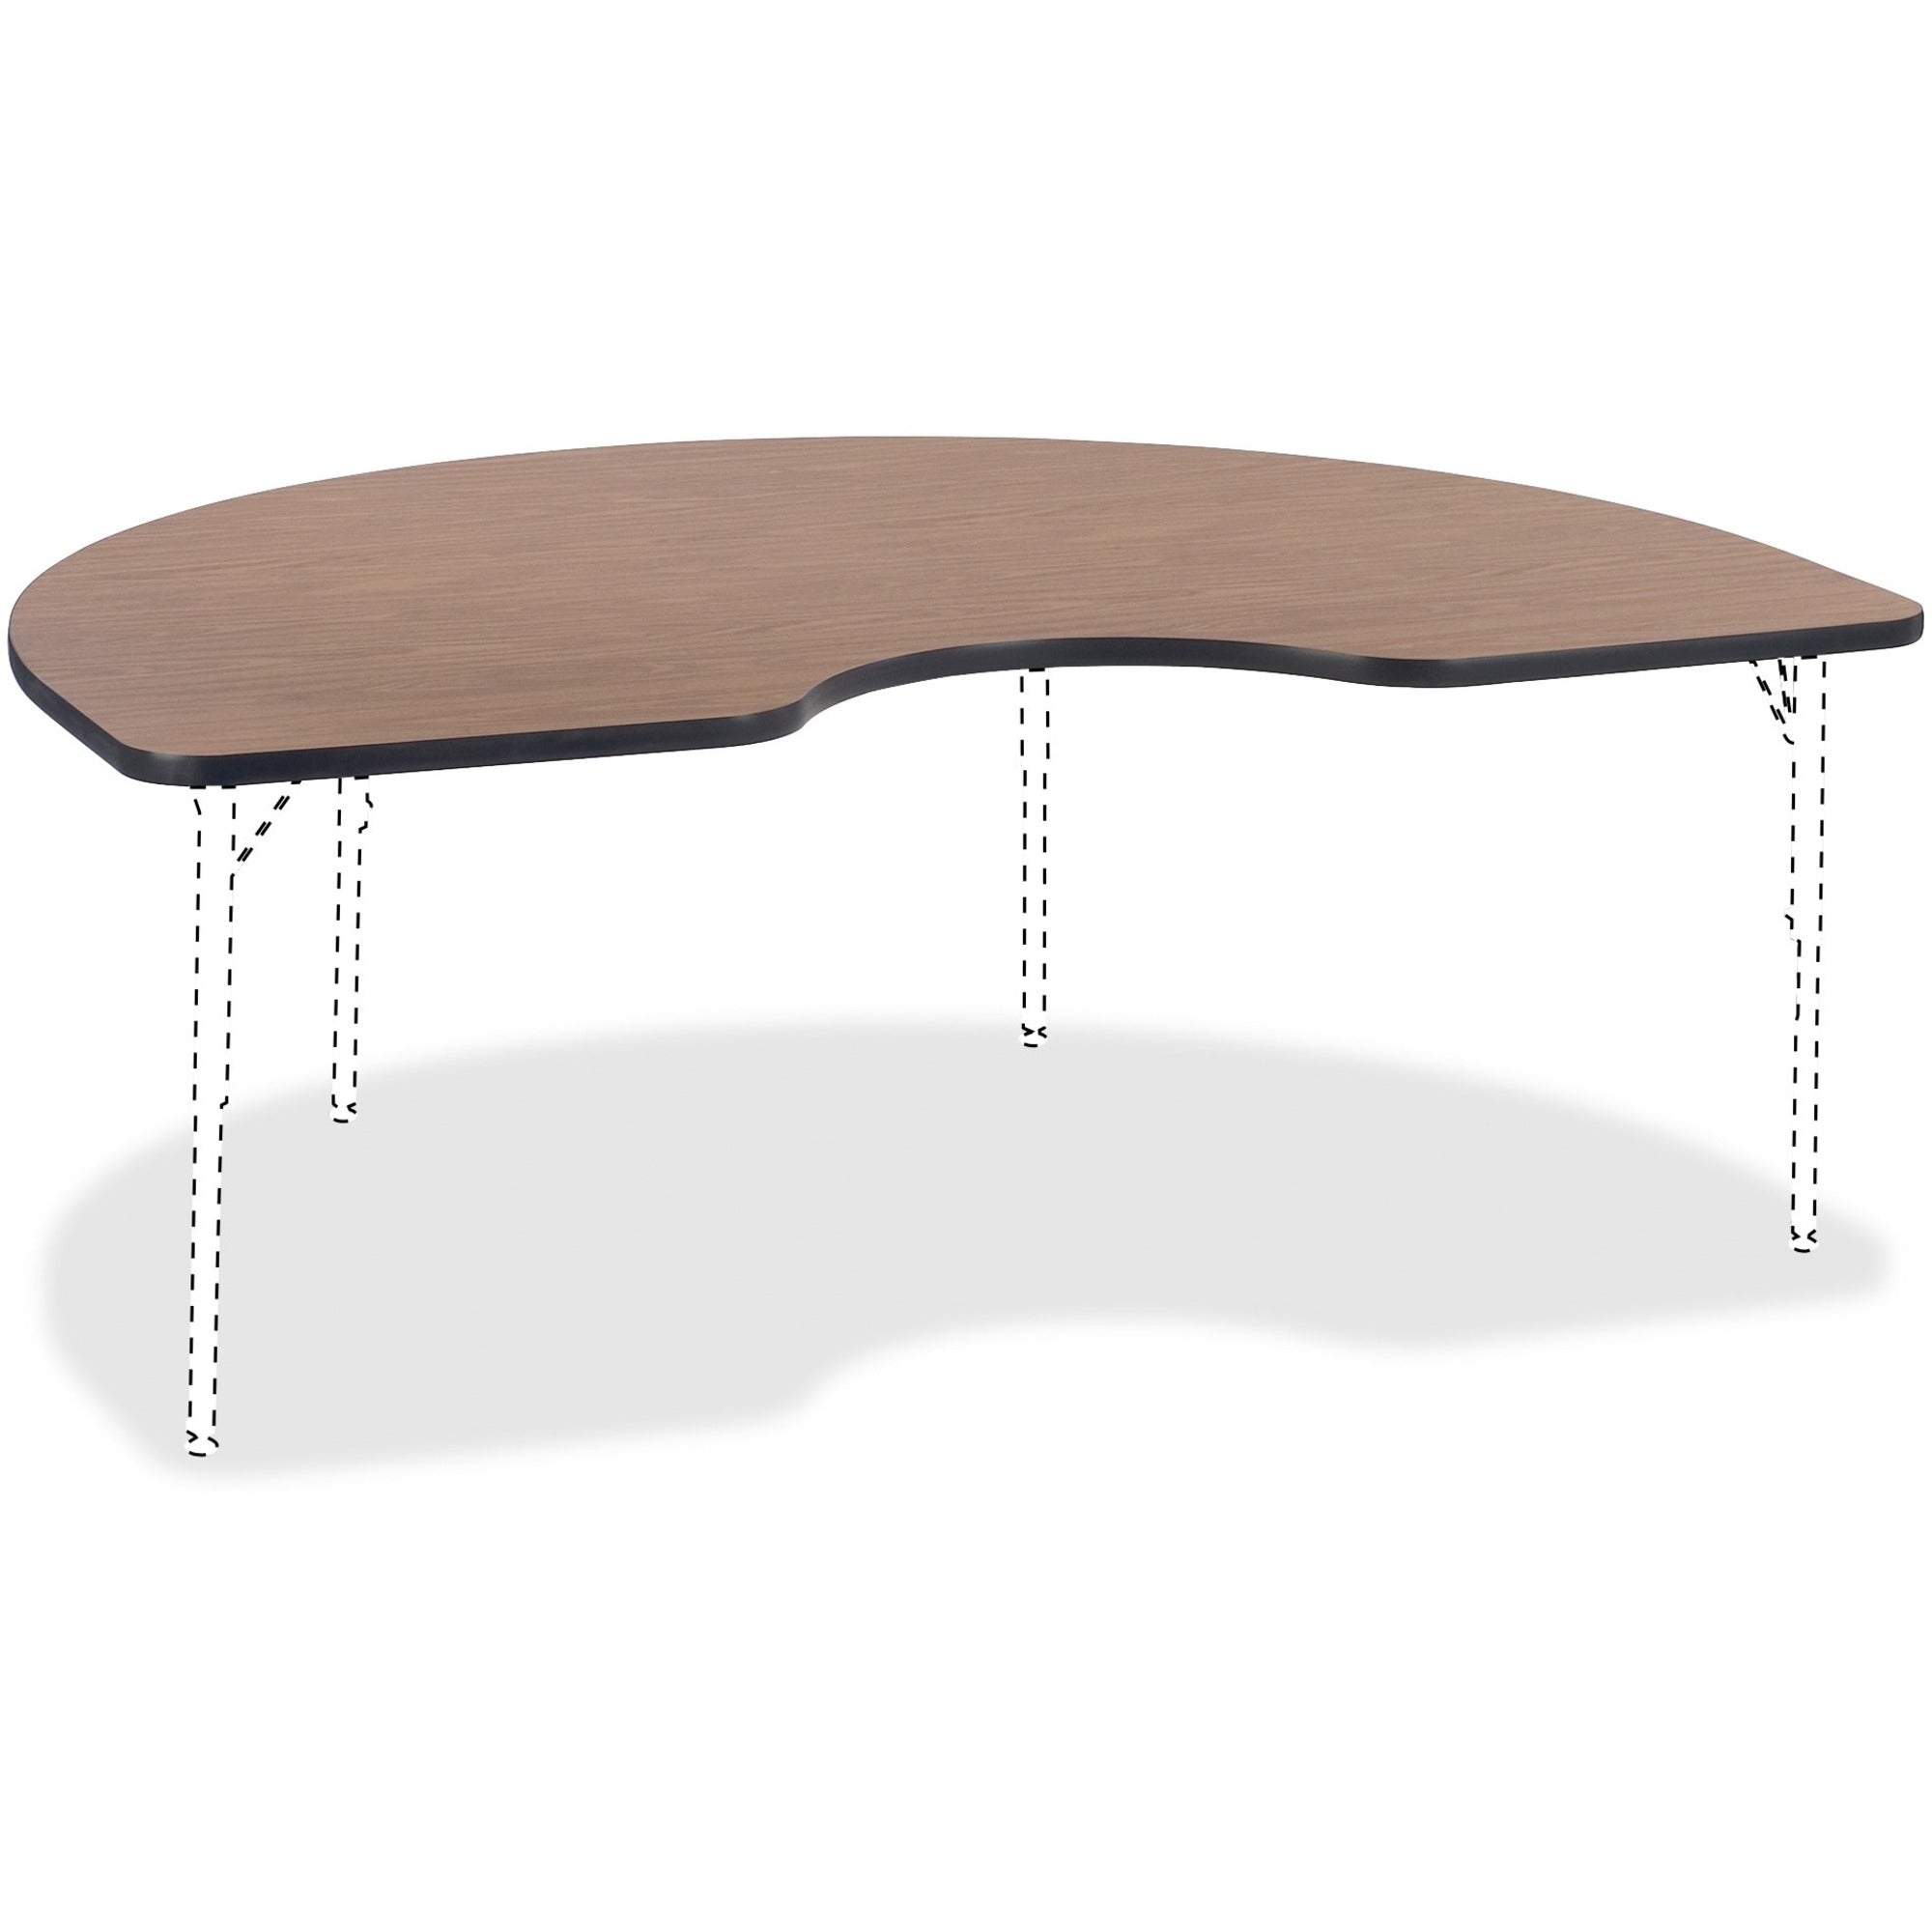 lorell-classroom-activity-tabletop-for-table-tophigh-pressure-laminate-hpl-kidney-shaped-medium-oak-top-x-72-table-top-width-x-48-table-top-depth-x-113-table-top-thickness-1-each_llr99898 - 1